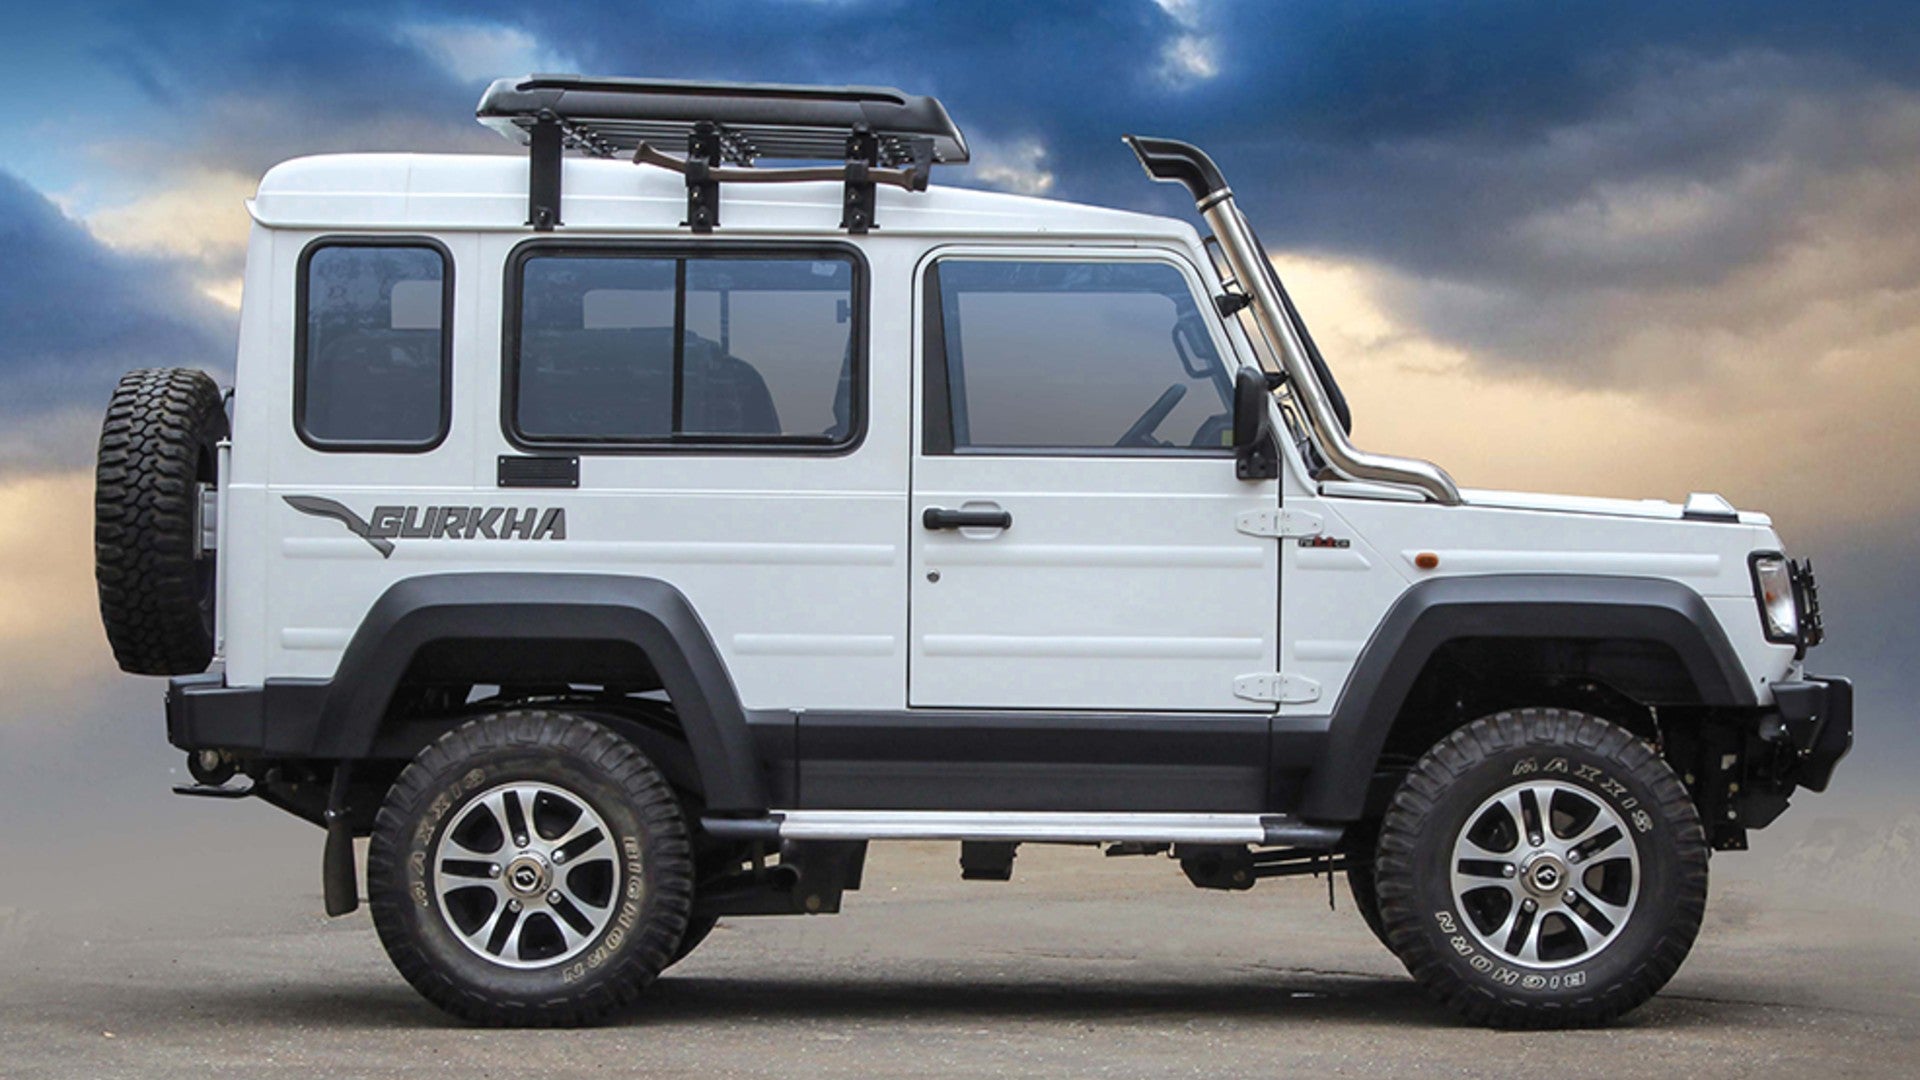 The Force Gurkha Is an Indian G-Wagen Lookalike With a Manual and